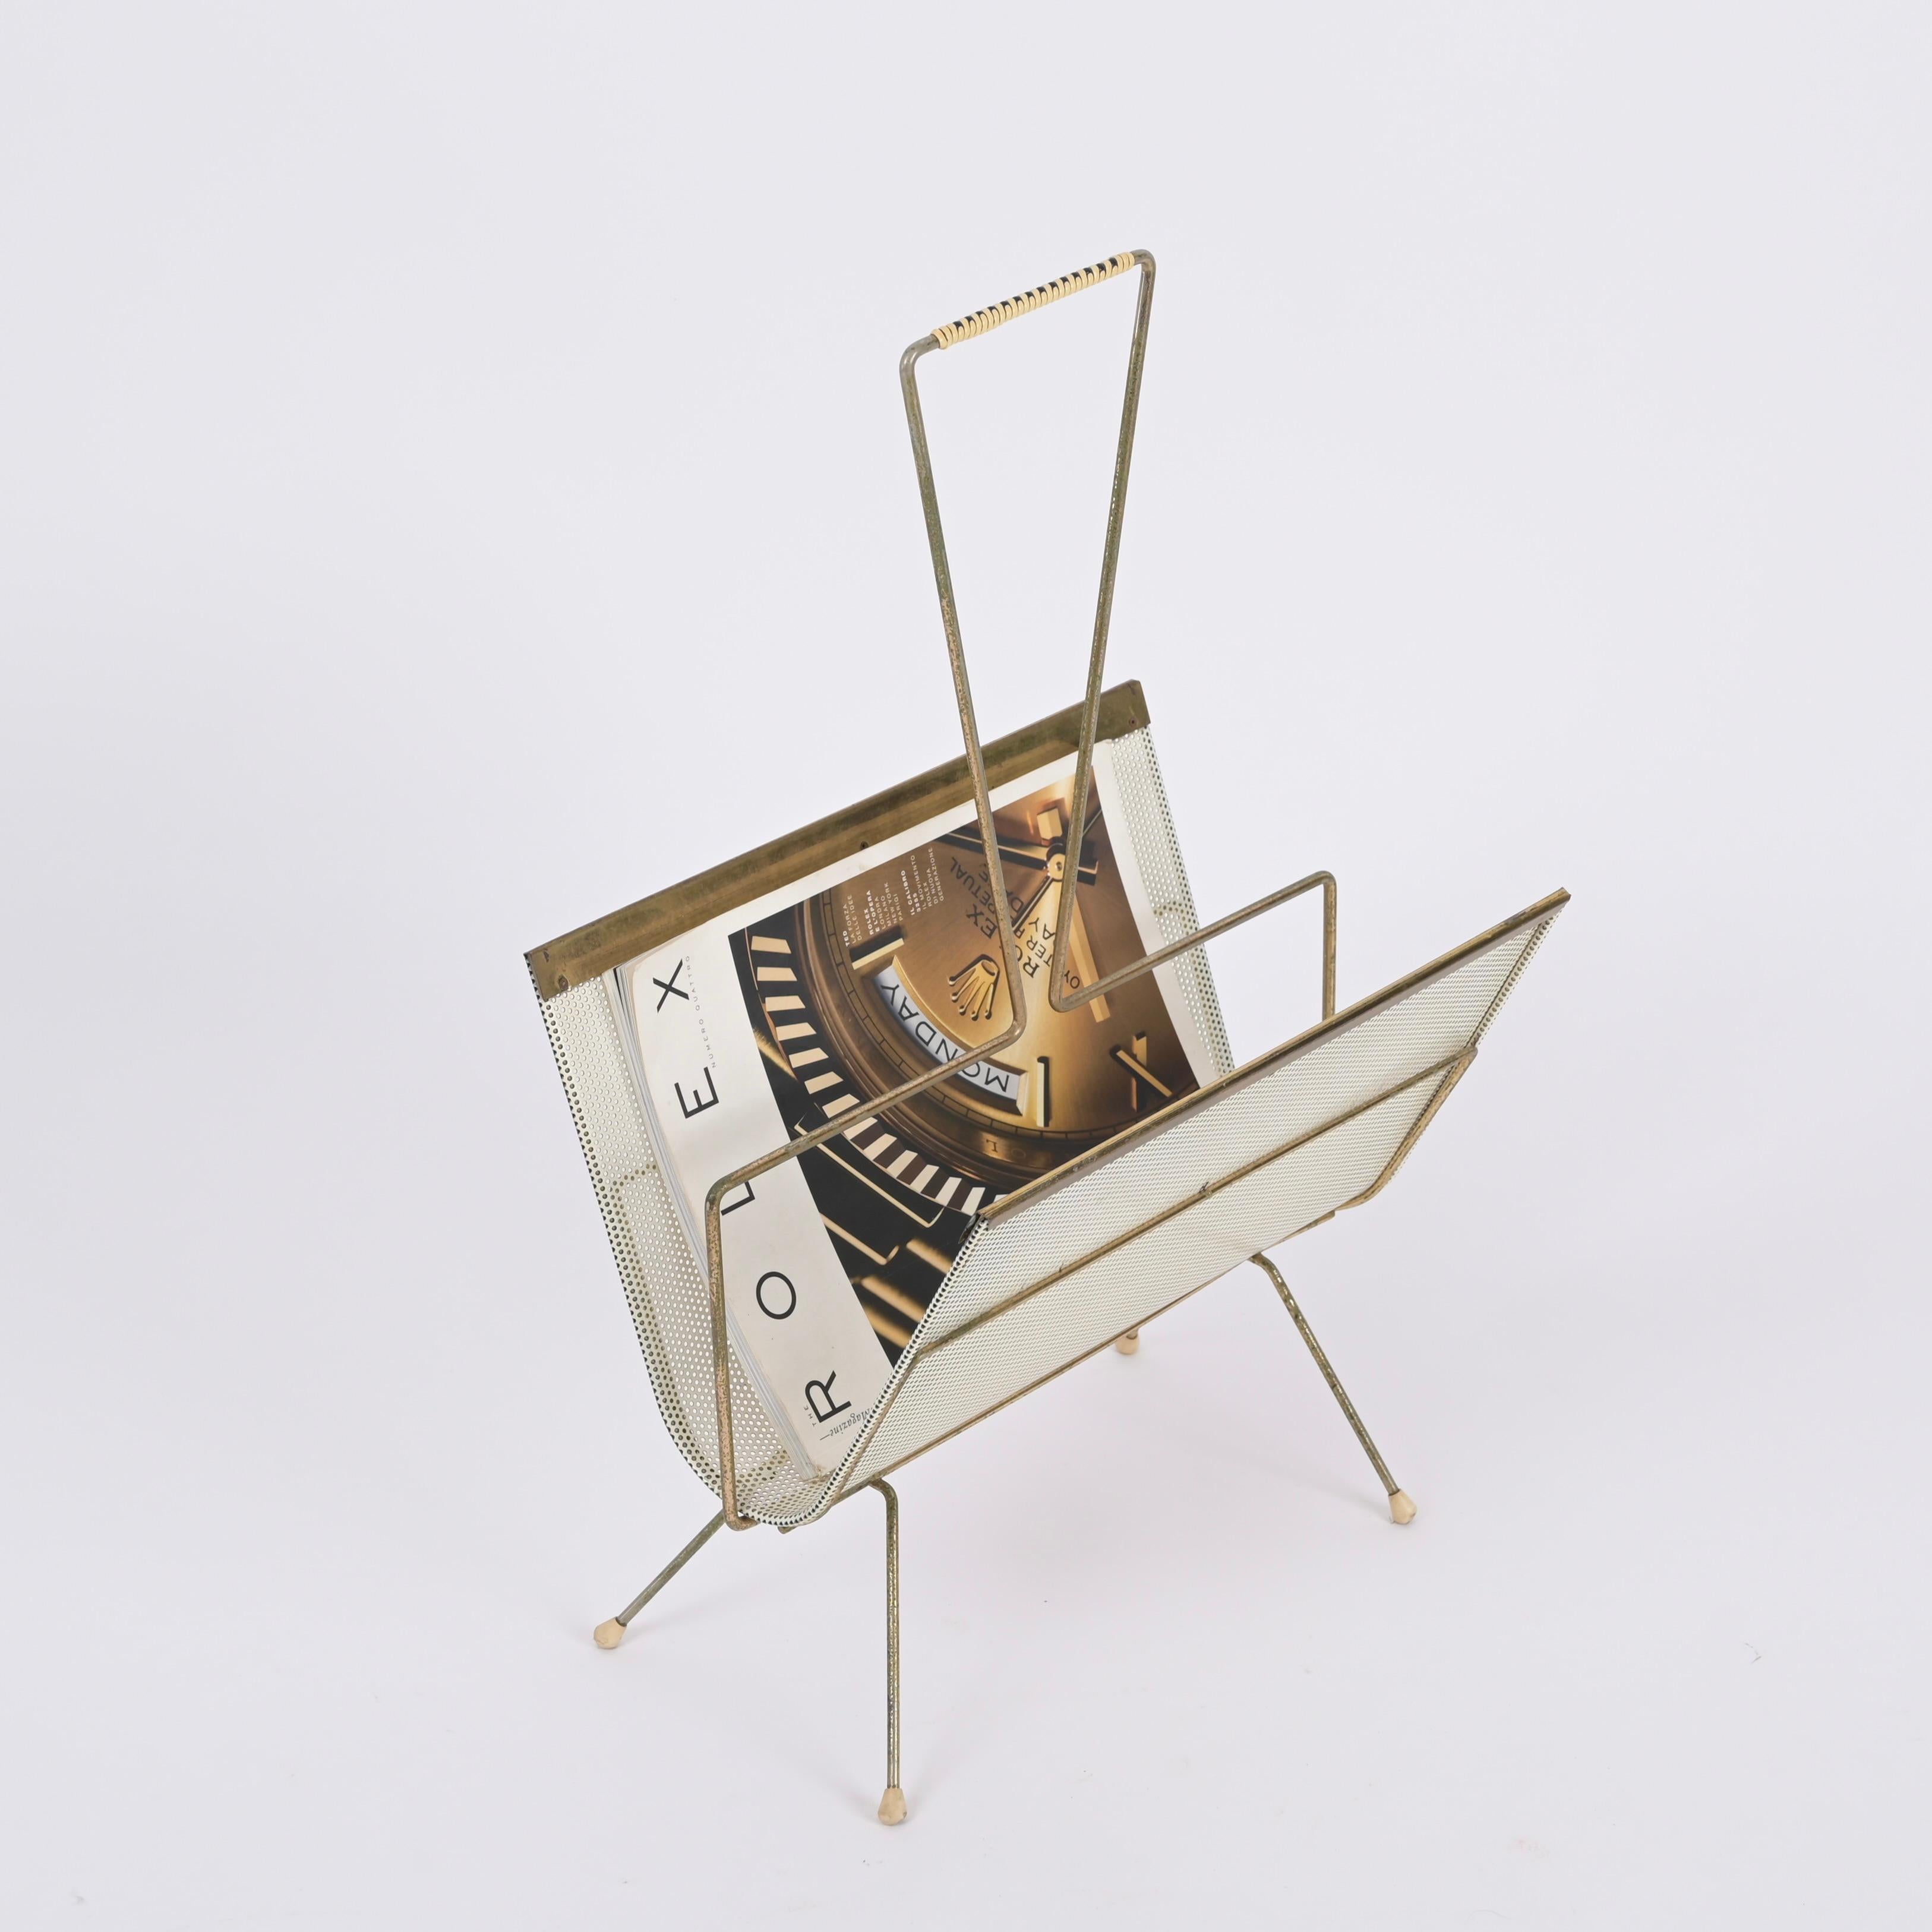 Gorgeous magazine rack in brass and enameled and perforated metal. This stunning piece was realized in France during the 1950s by Mathieu Mategot.

This one of a kind magazine rack has structure in gilt and bent iron that supports a rounded tray for